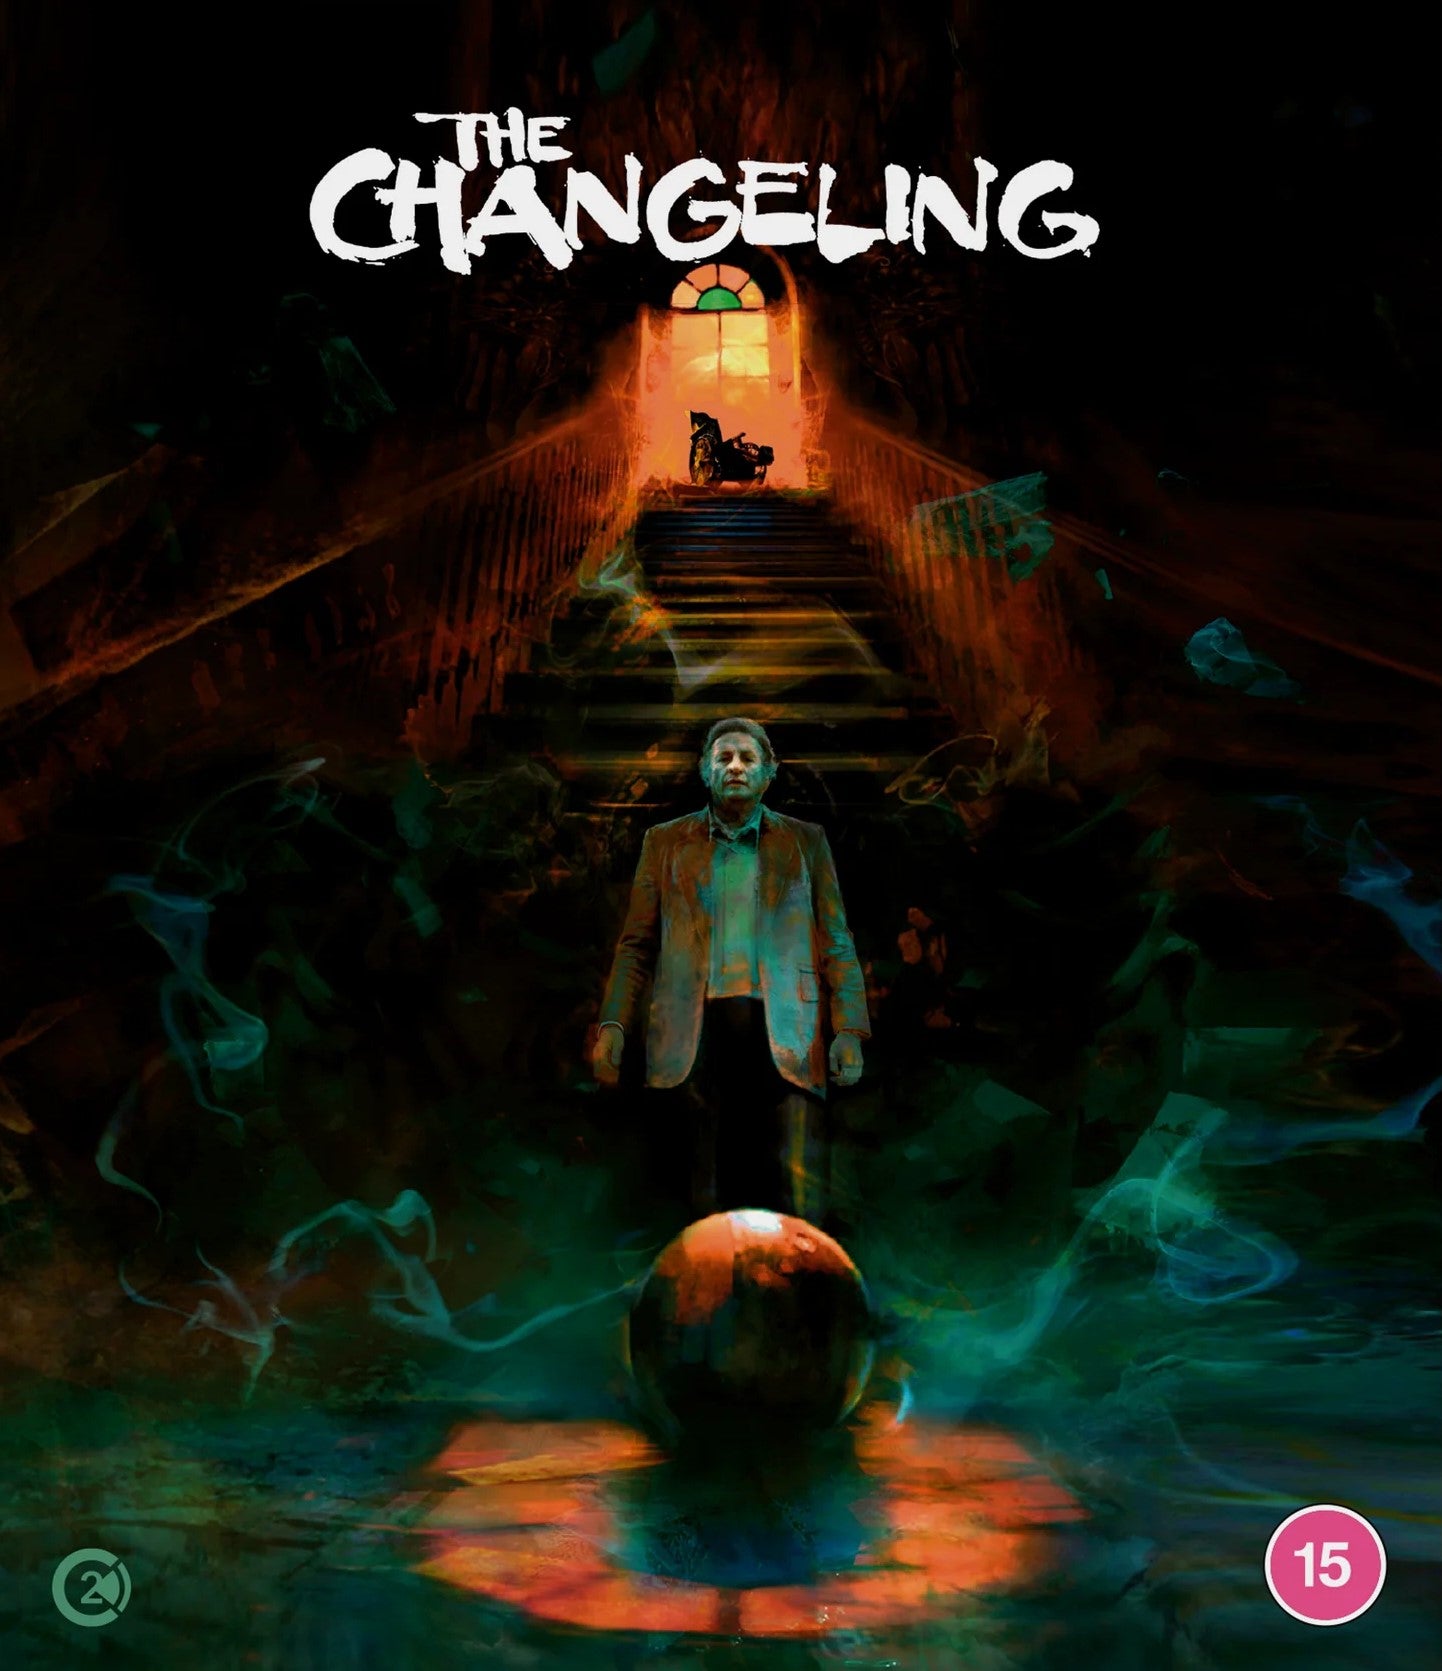 The Changeling Second Sight Films 4K UHD [NEW]